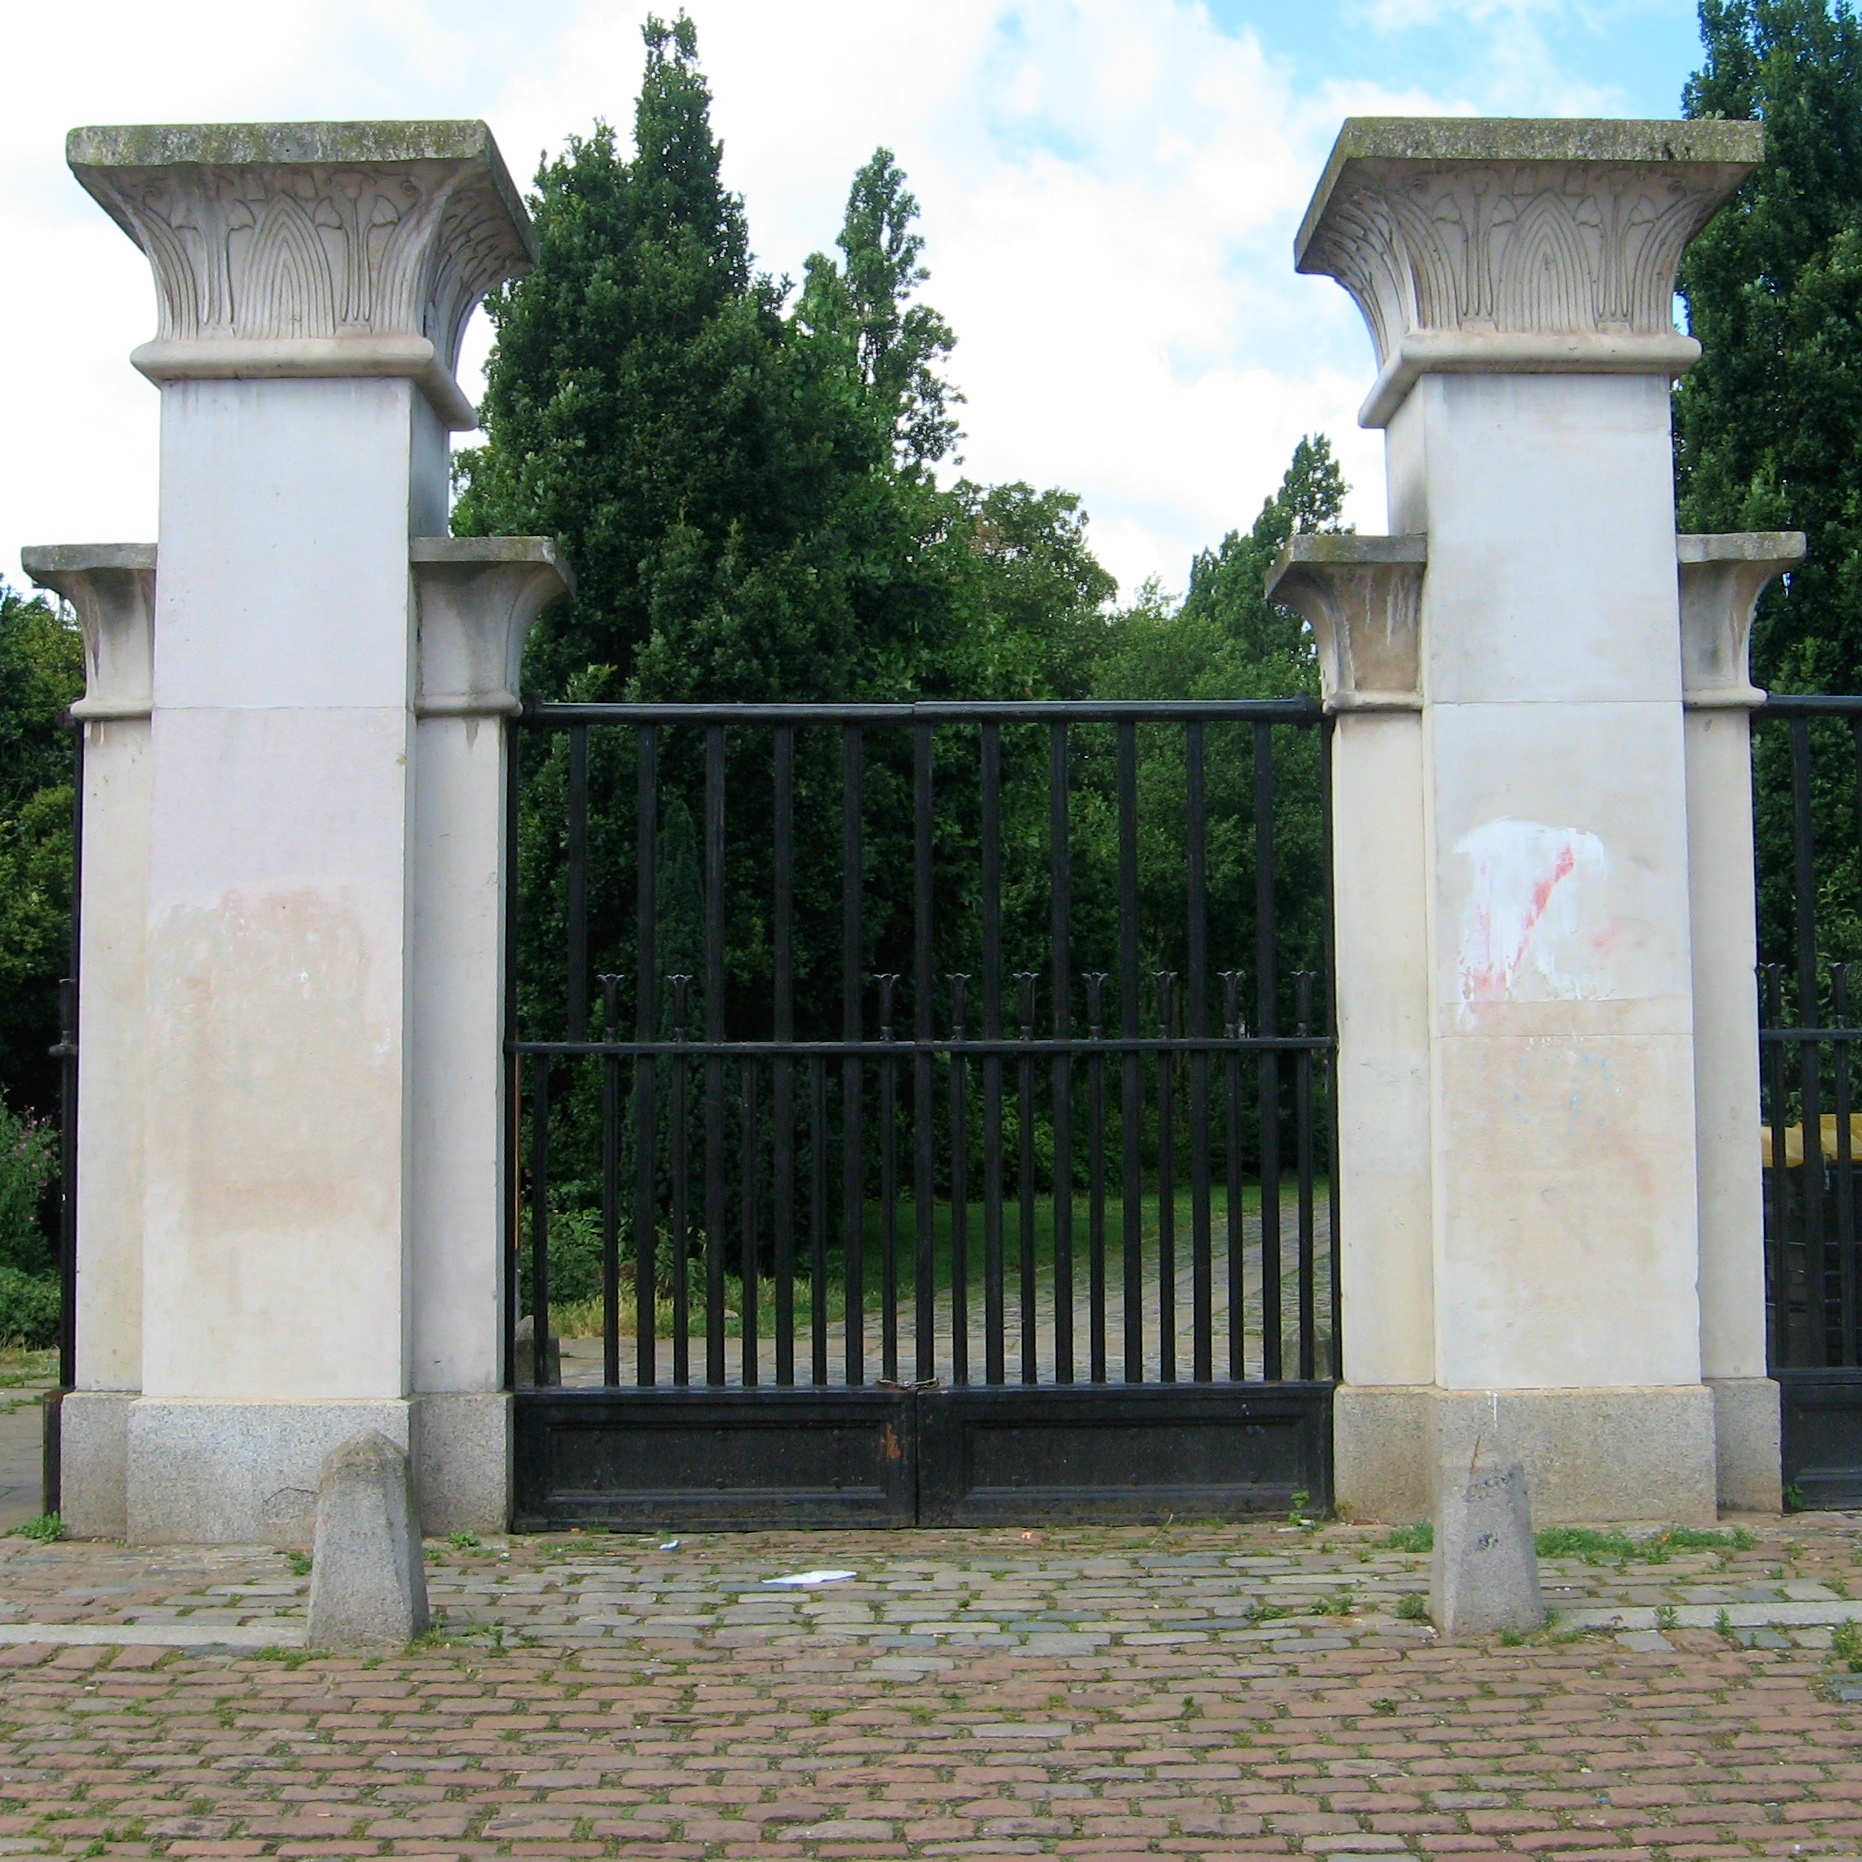 the gate to a garden area has two pillars